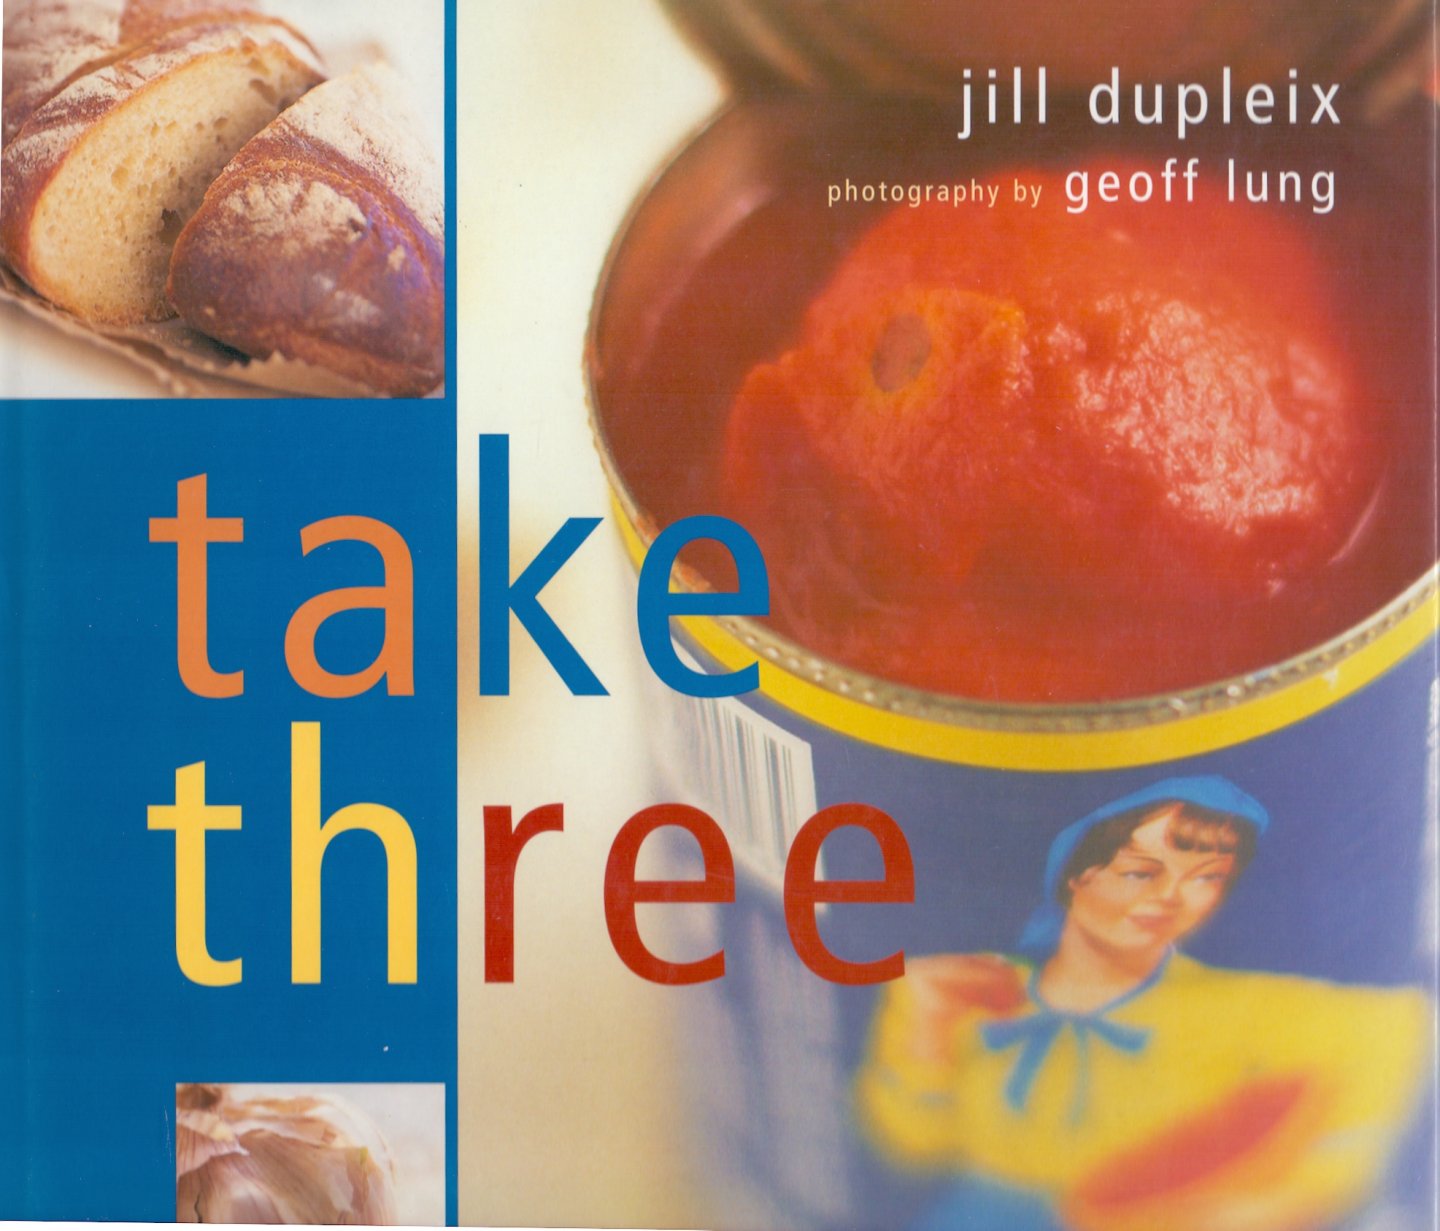 Dupleix, Jill (ds1242) - Take three, cooking with 3 main ingredients